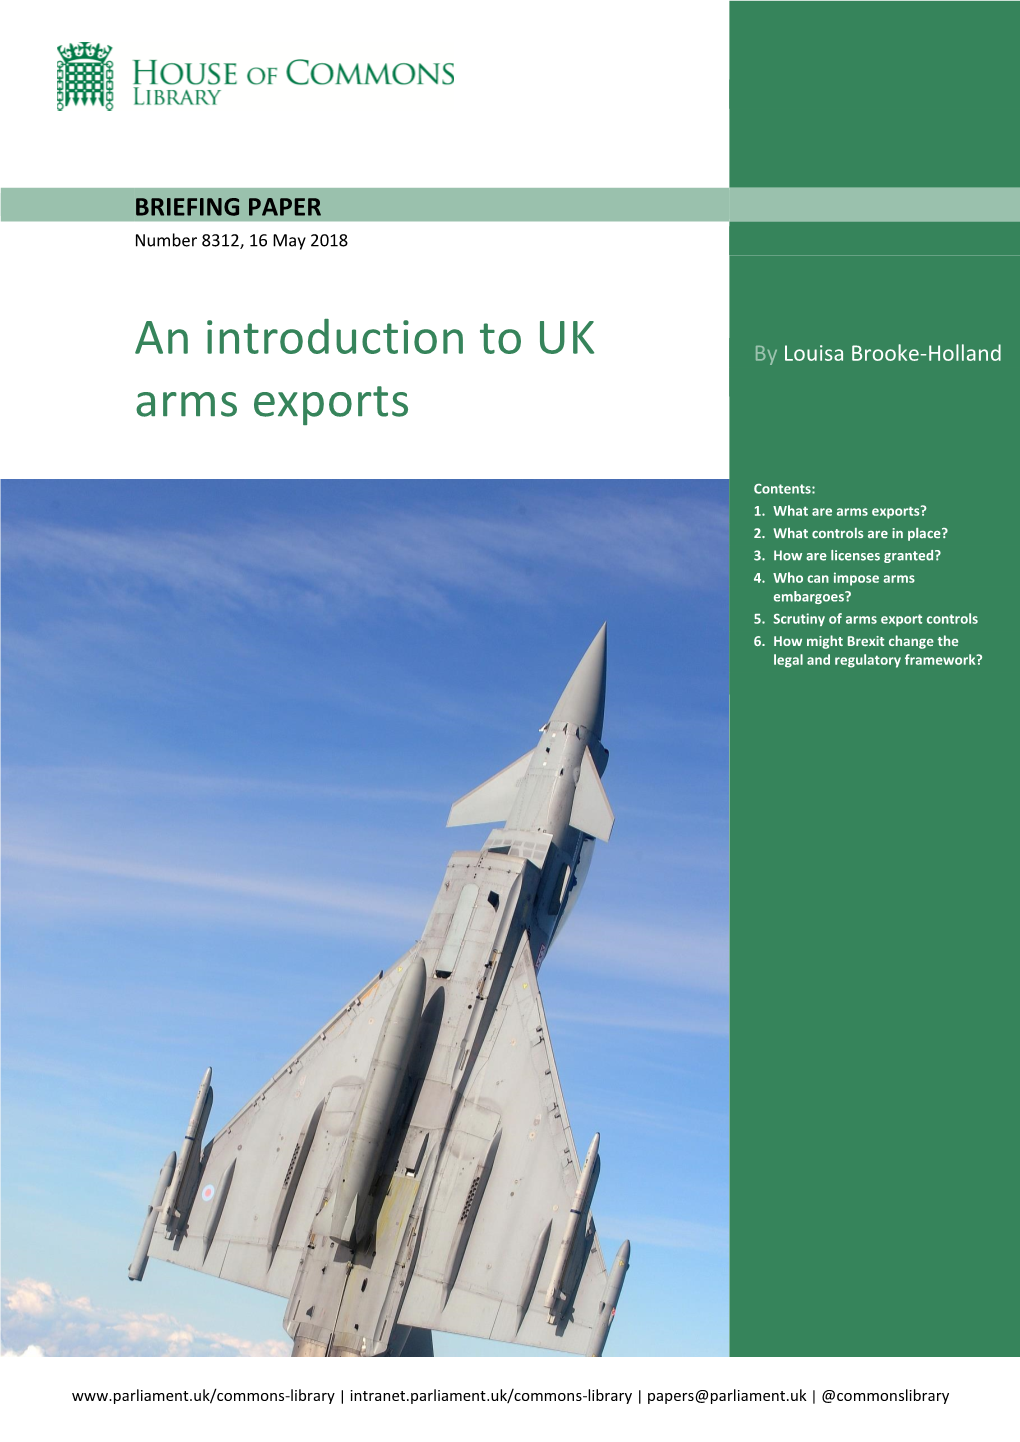 An Introduction to UK Arms Exports